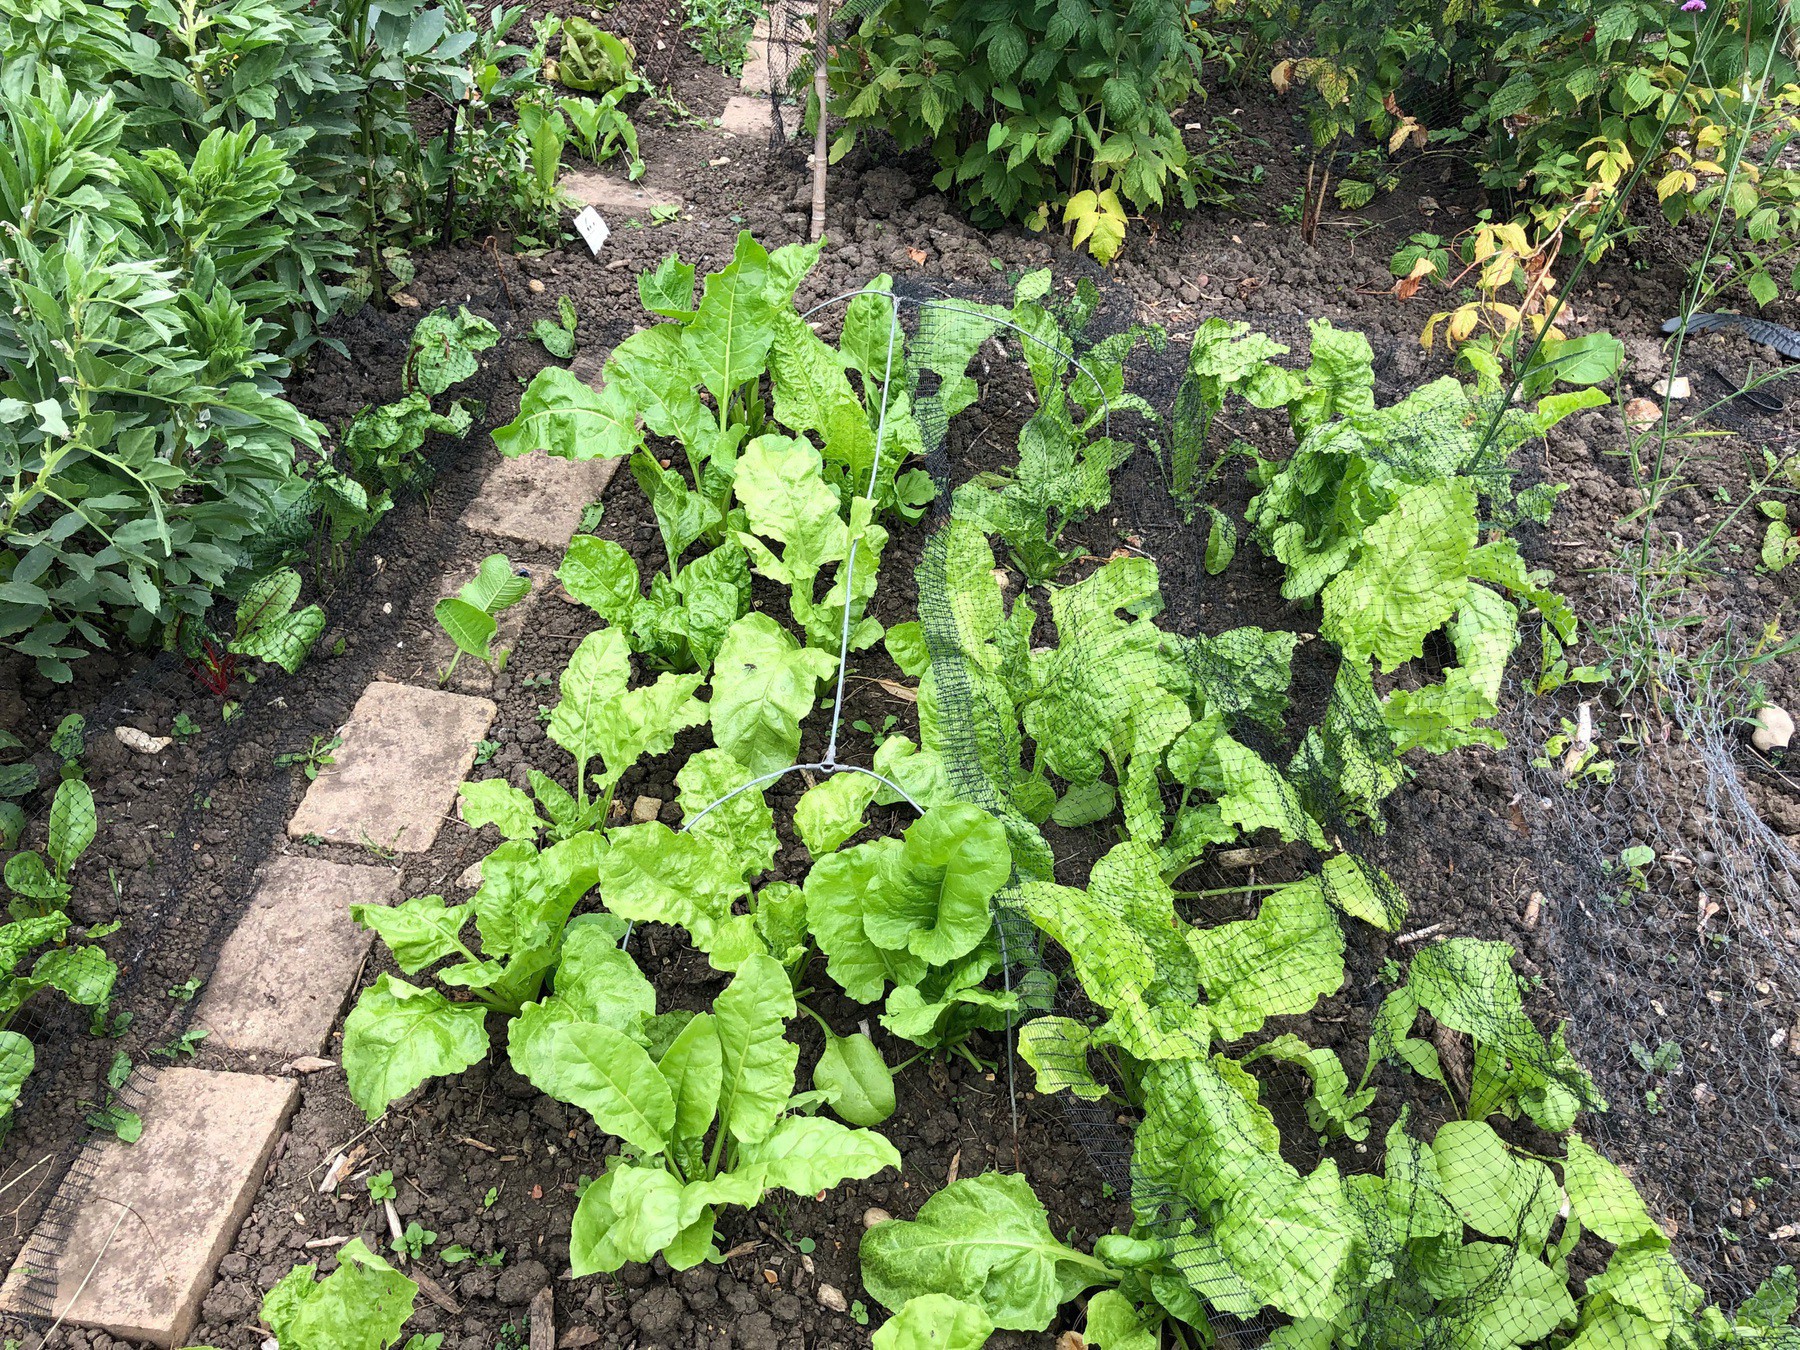 Spinach growing in the ground